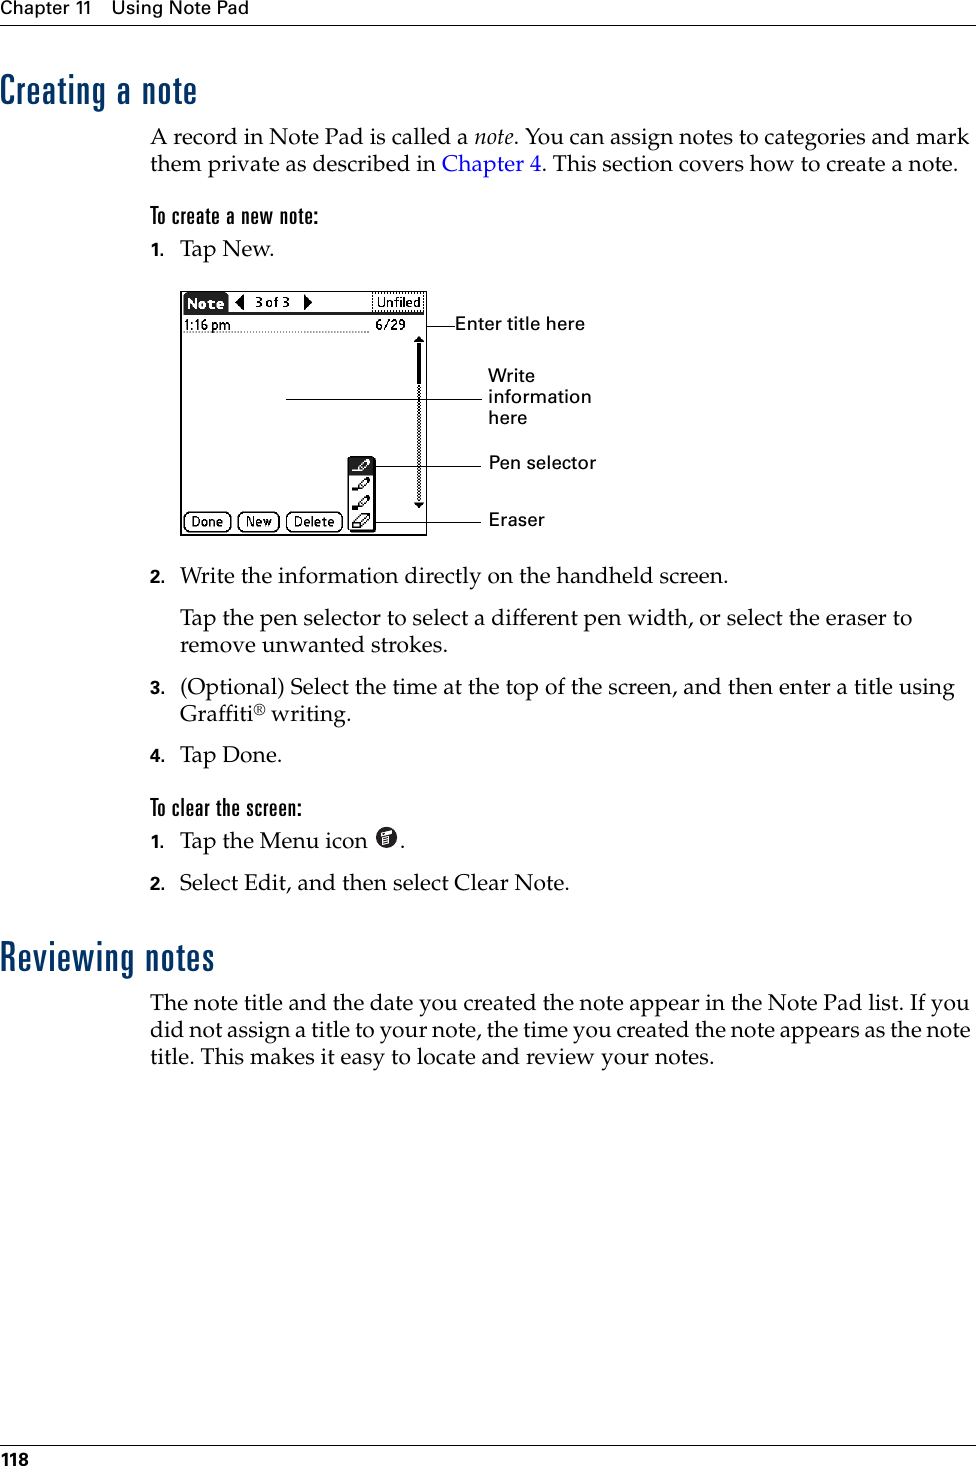 Chapter 11 Using Note Pad118Creating a noteA record in Note Pad is called a note. You can assign notes to categories and mark them private as described in Chapter 4. This section covers how to create a note.To create a new note:1. Tap New.2. Write the information directly on the handheld screen.Tap the pen selector to select a different pen width, or select the eraser to remove unwanted strokes.3. (Optional) Select the time at the top of the screen, and then enter a title using Graffiti® writing.4. Tap Don e.To clear the screen:1. Tap the Menu icon  . 2. Select Edit, and then select Clear Note.Reviewing notesThe note title and the date you created the note appear in the Note Pad list. If you did not assign a title to your note, the time you created the note appears as the note title. This makes it easy to locate and review your notes. Pen selectorWrite information hereEnter title hereEraserPalm, Inc. Confidential